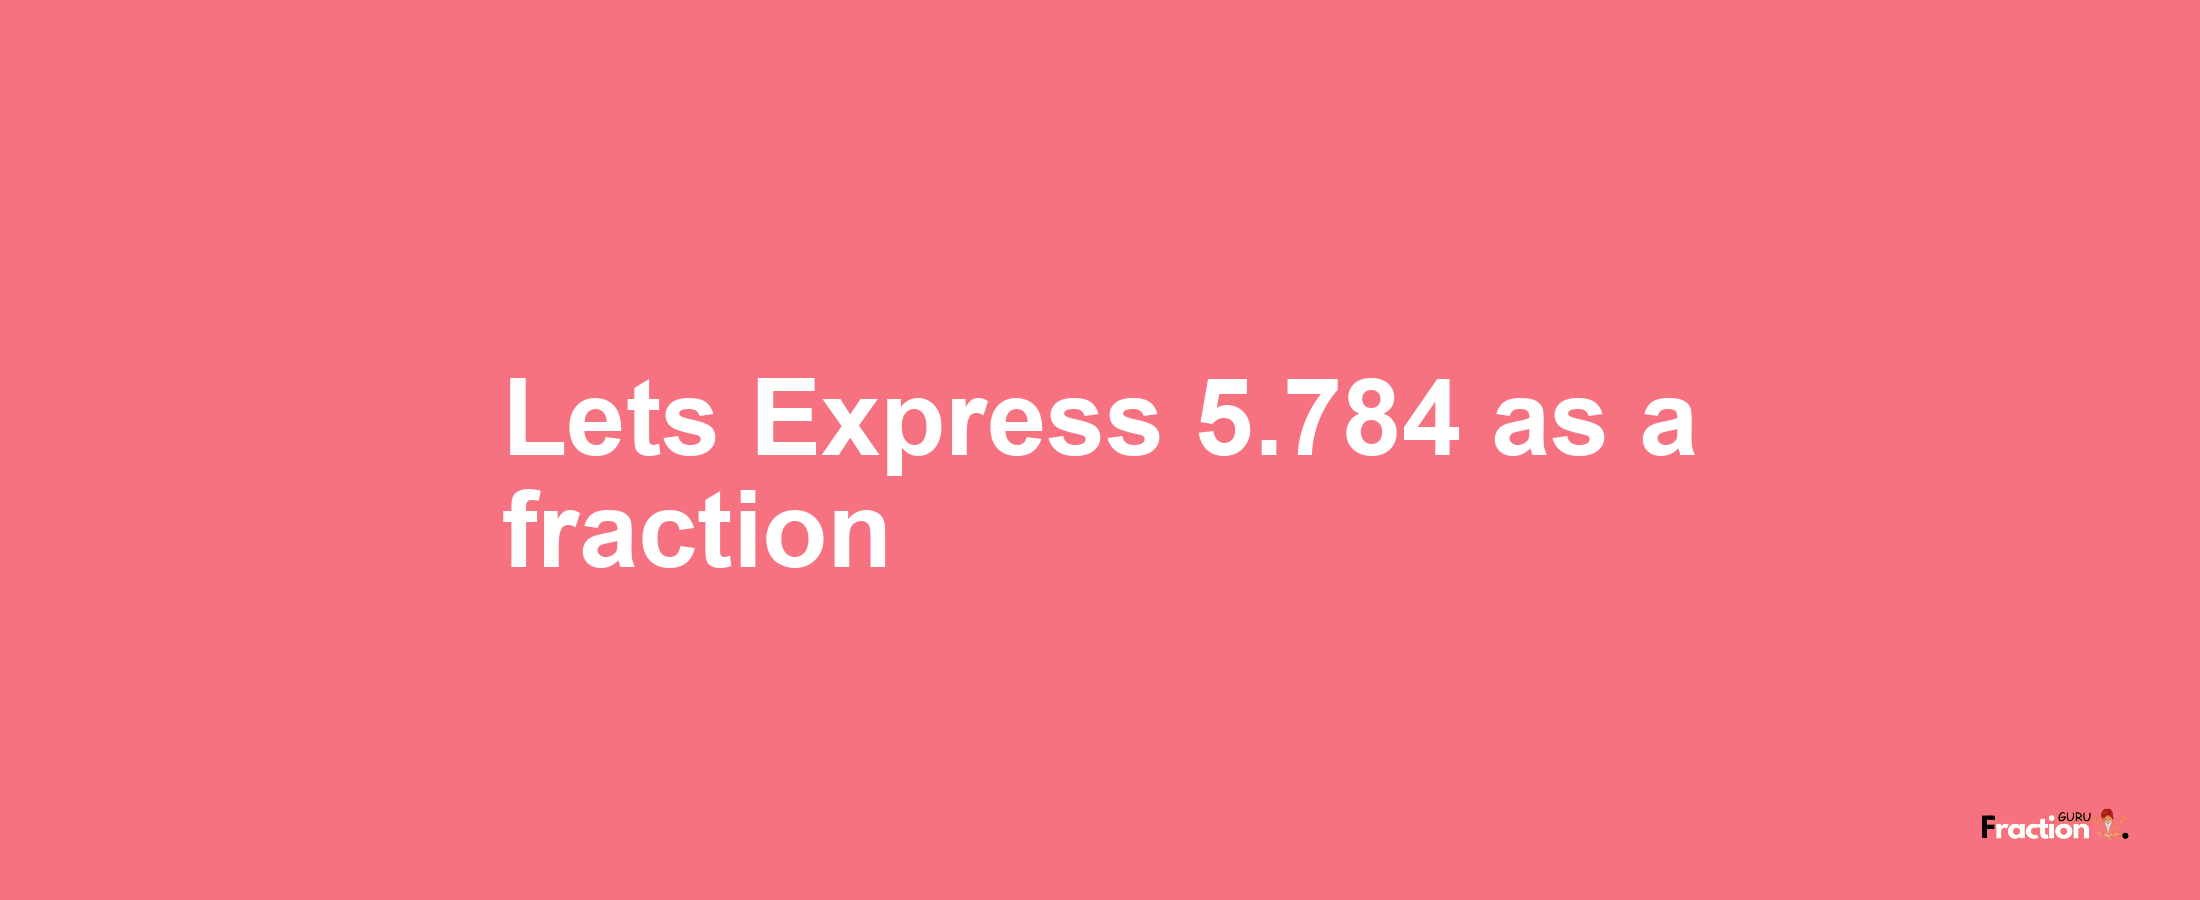 Lets Express 5.784 as afraction